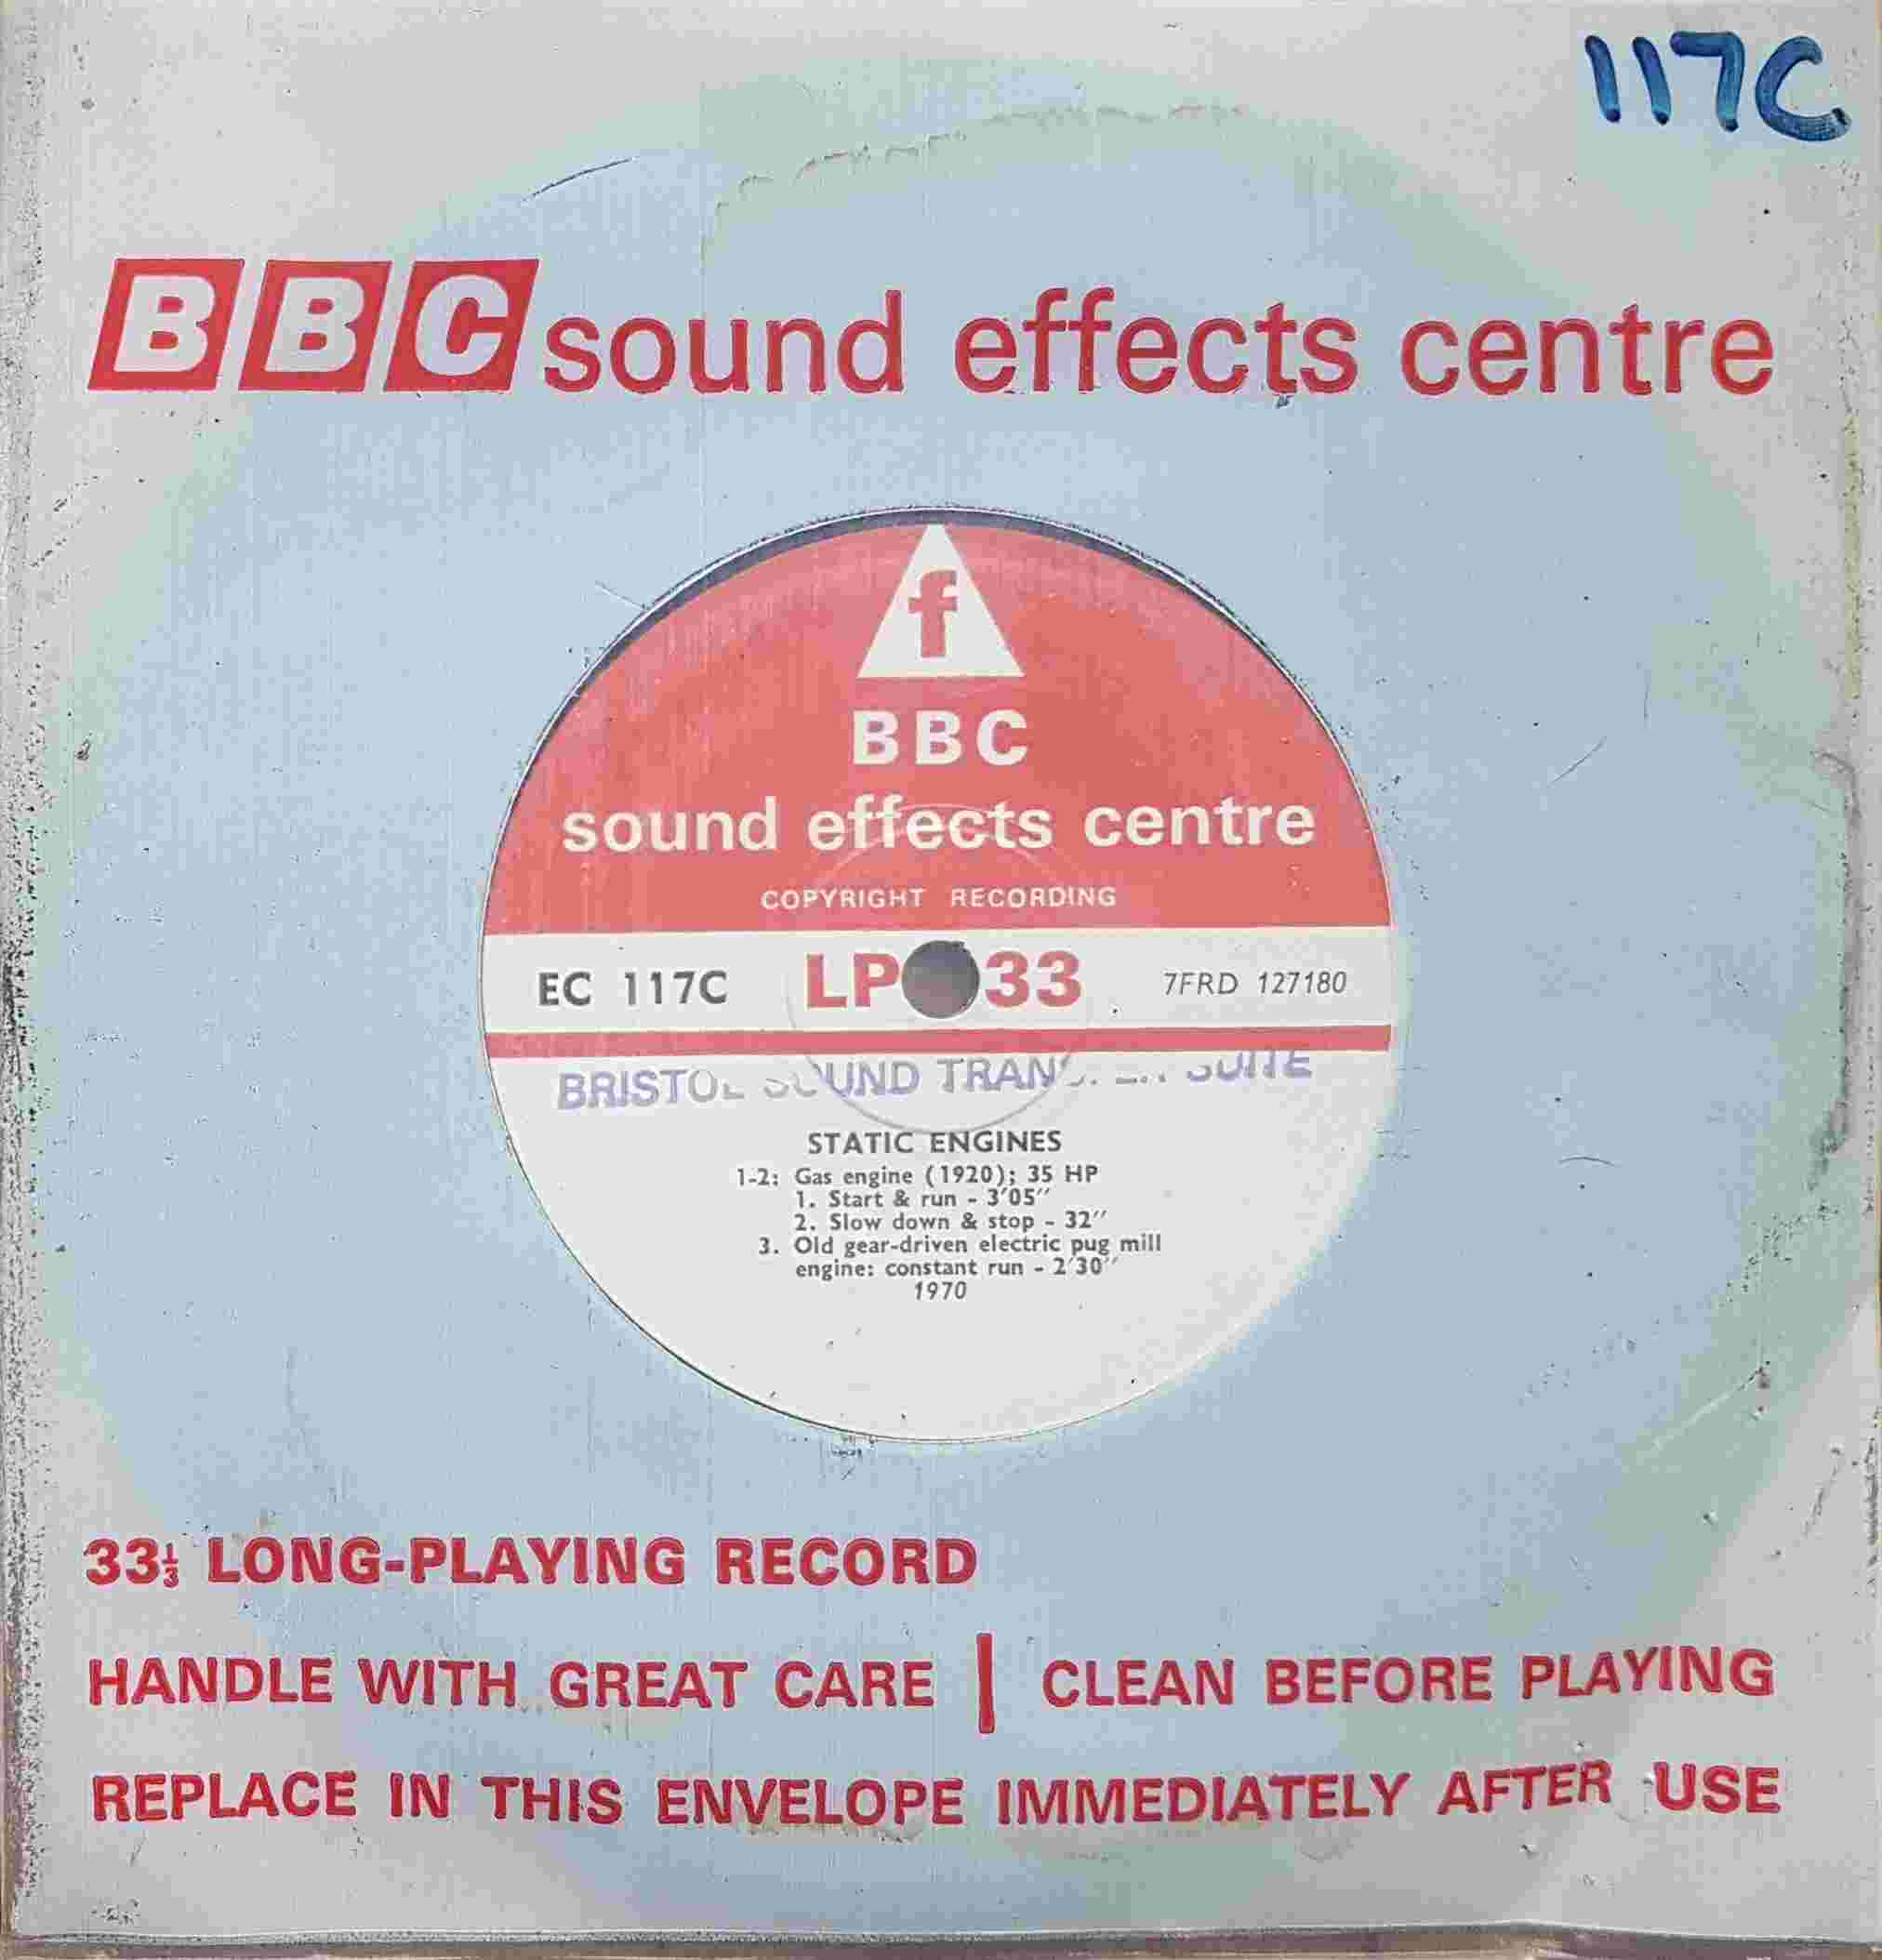 Picture of EC 117C Static engines by artist Not registered from the BBC records and Tapes library